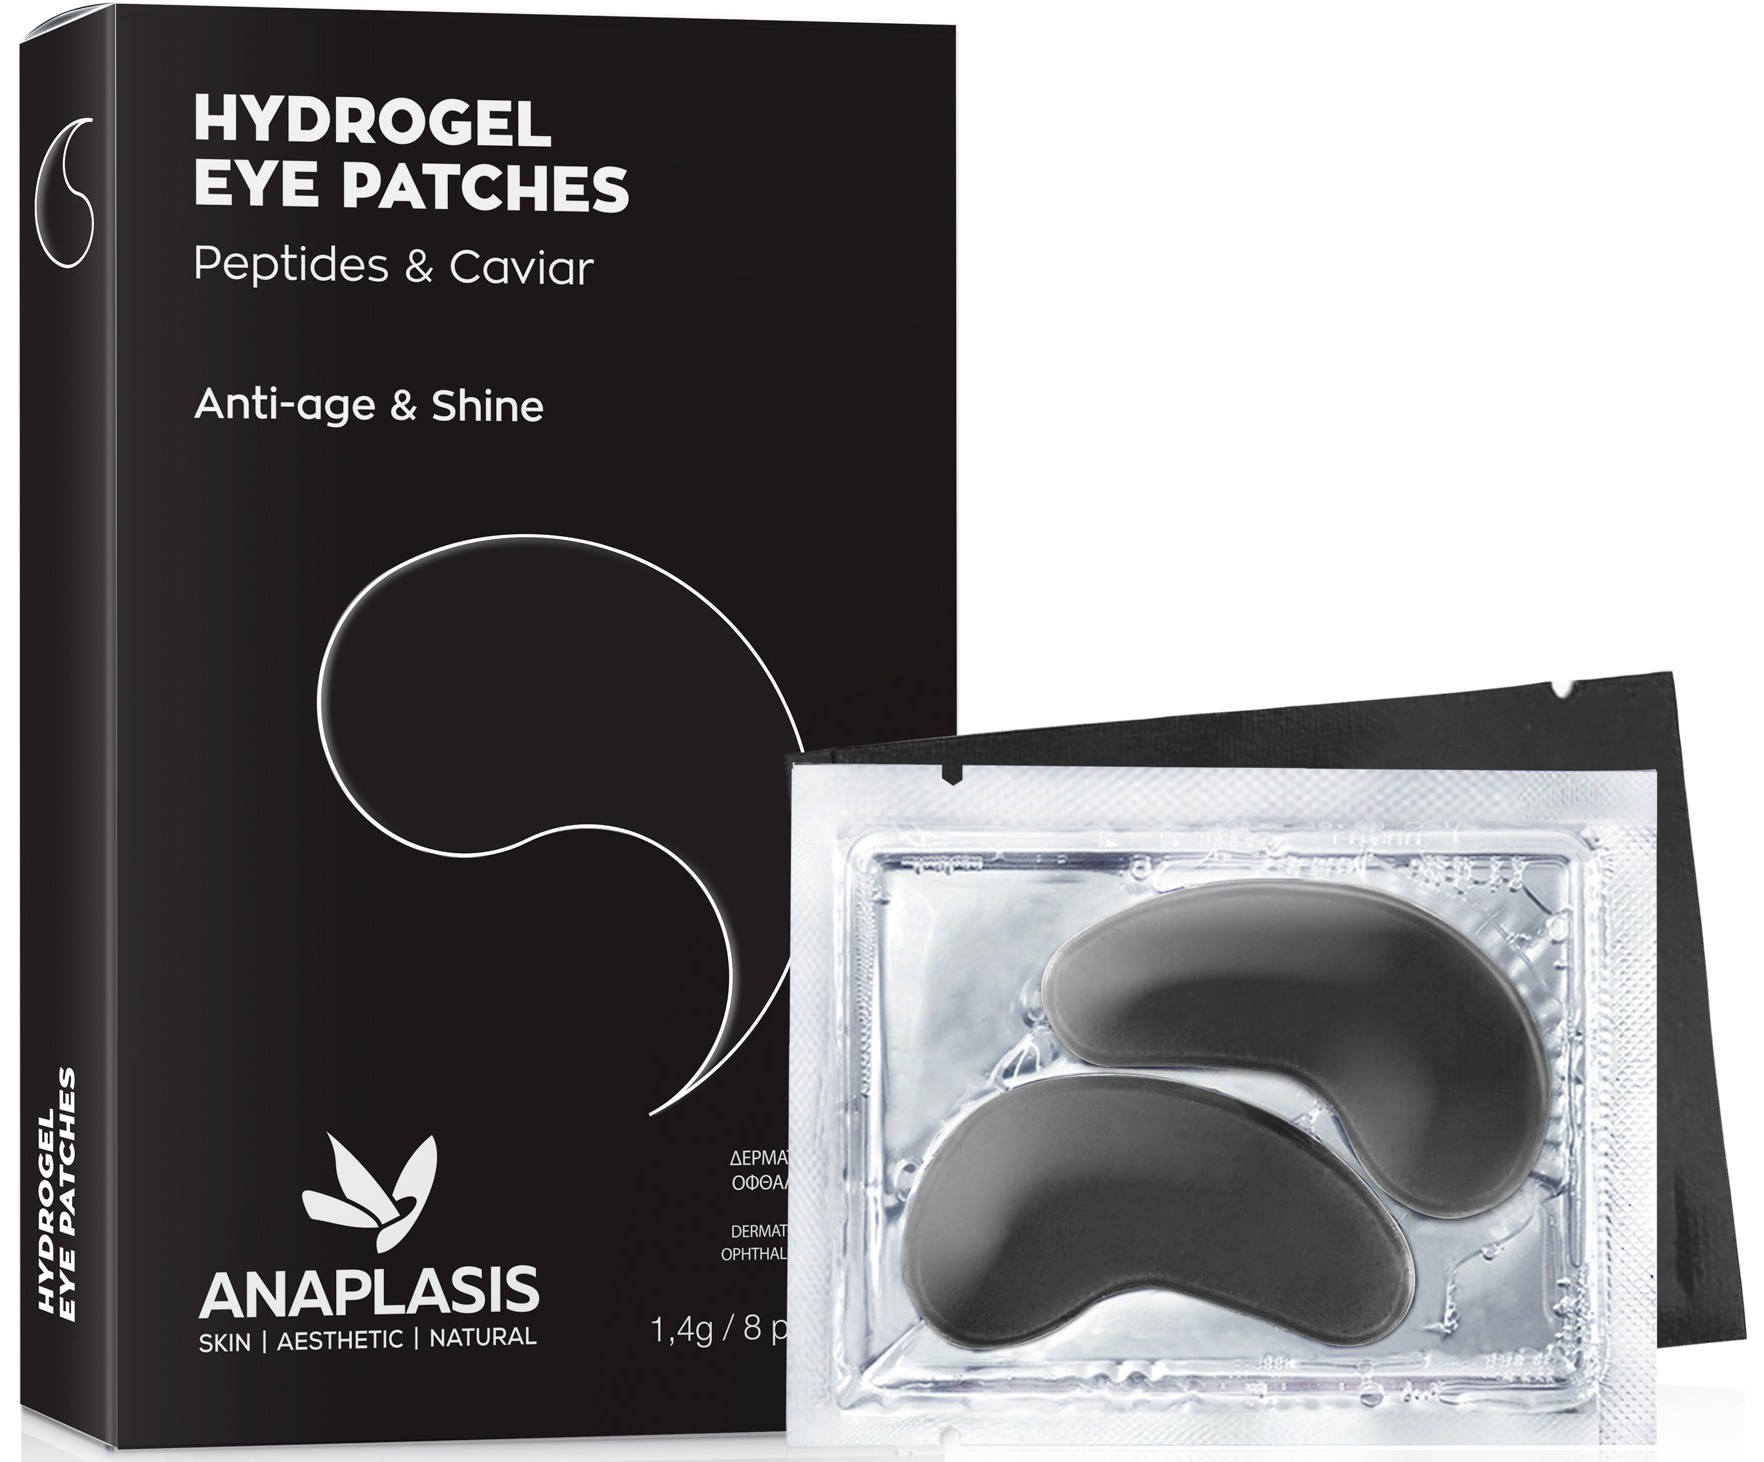 Anaplasis Hydrogel Peptides & Caviar Anti Age & Shine Eye Patches